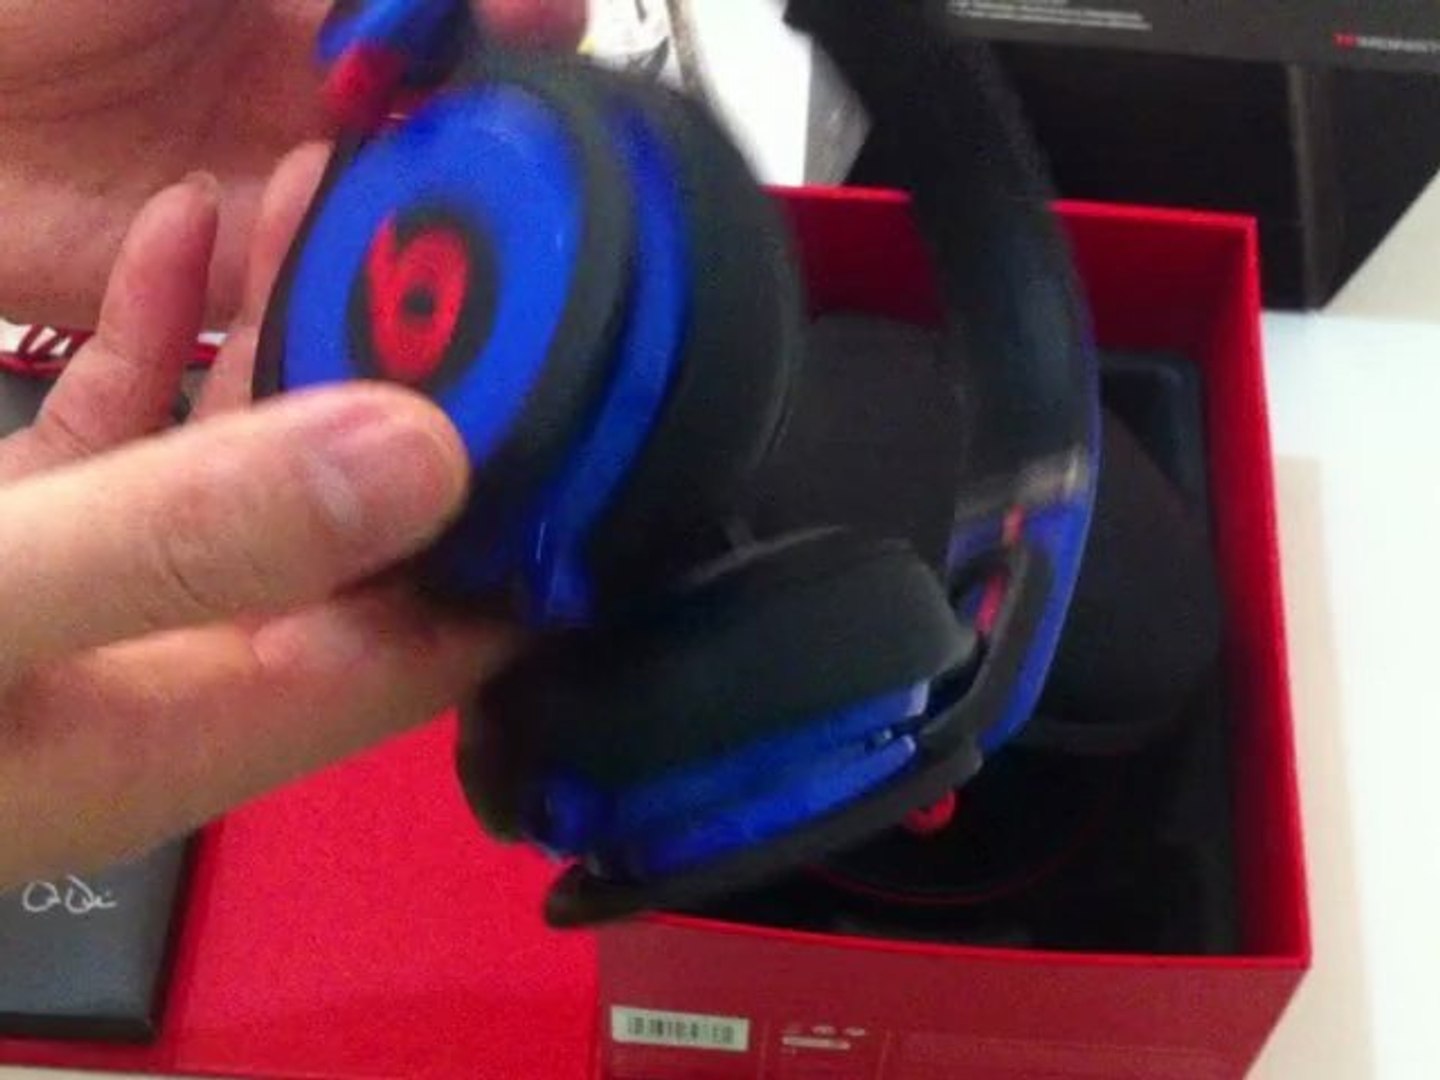 Beats by Dr. Dre Mixr David Guetta Edition (Blue) unboxing - video  Dailymotion